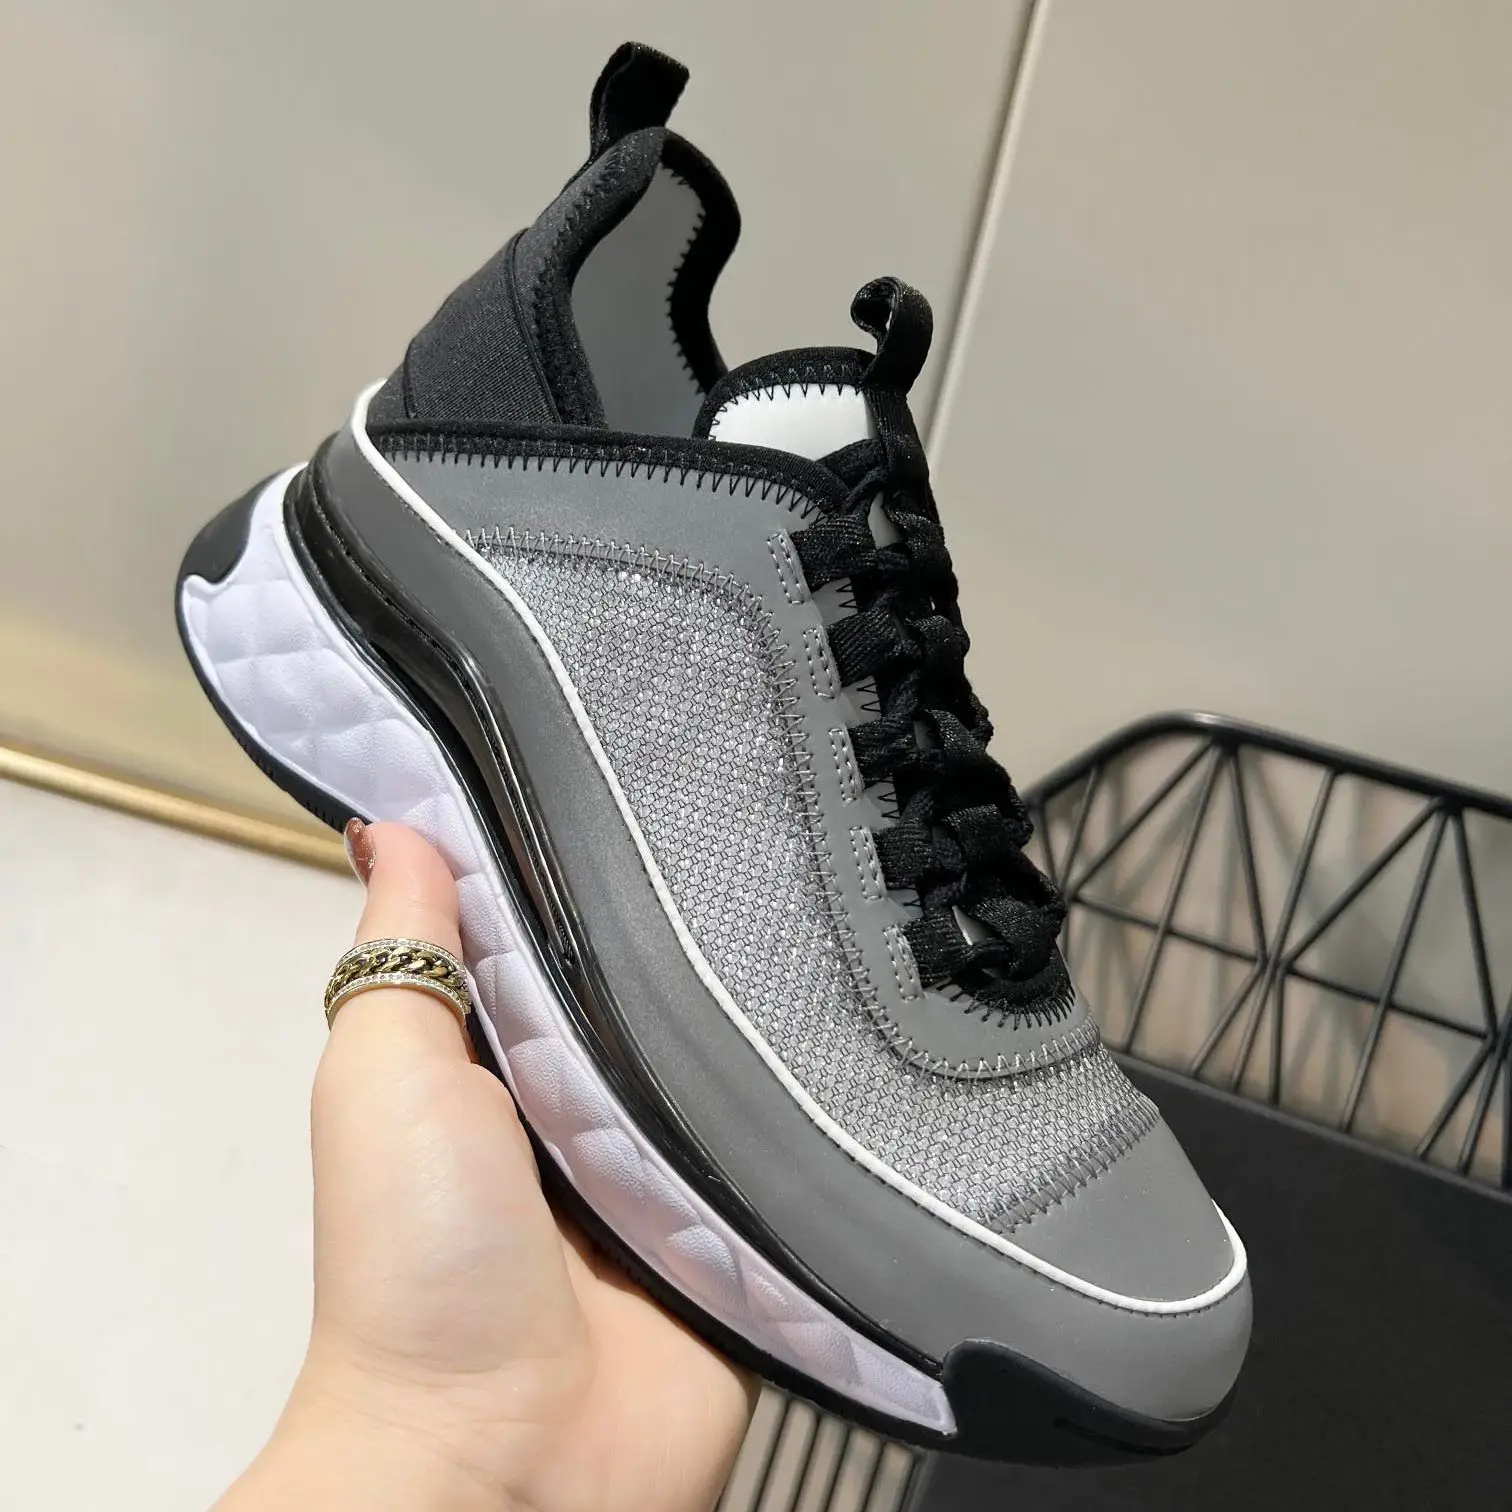 

Females Shoes Running Sport Shoes Ladies Luxury Design Zapatillas Mujer Quality Sneakers Women Mesh Breathable Chaussure Femme